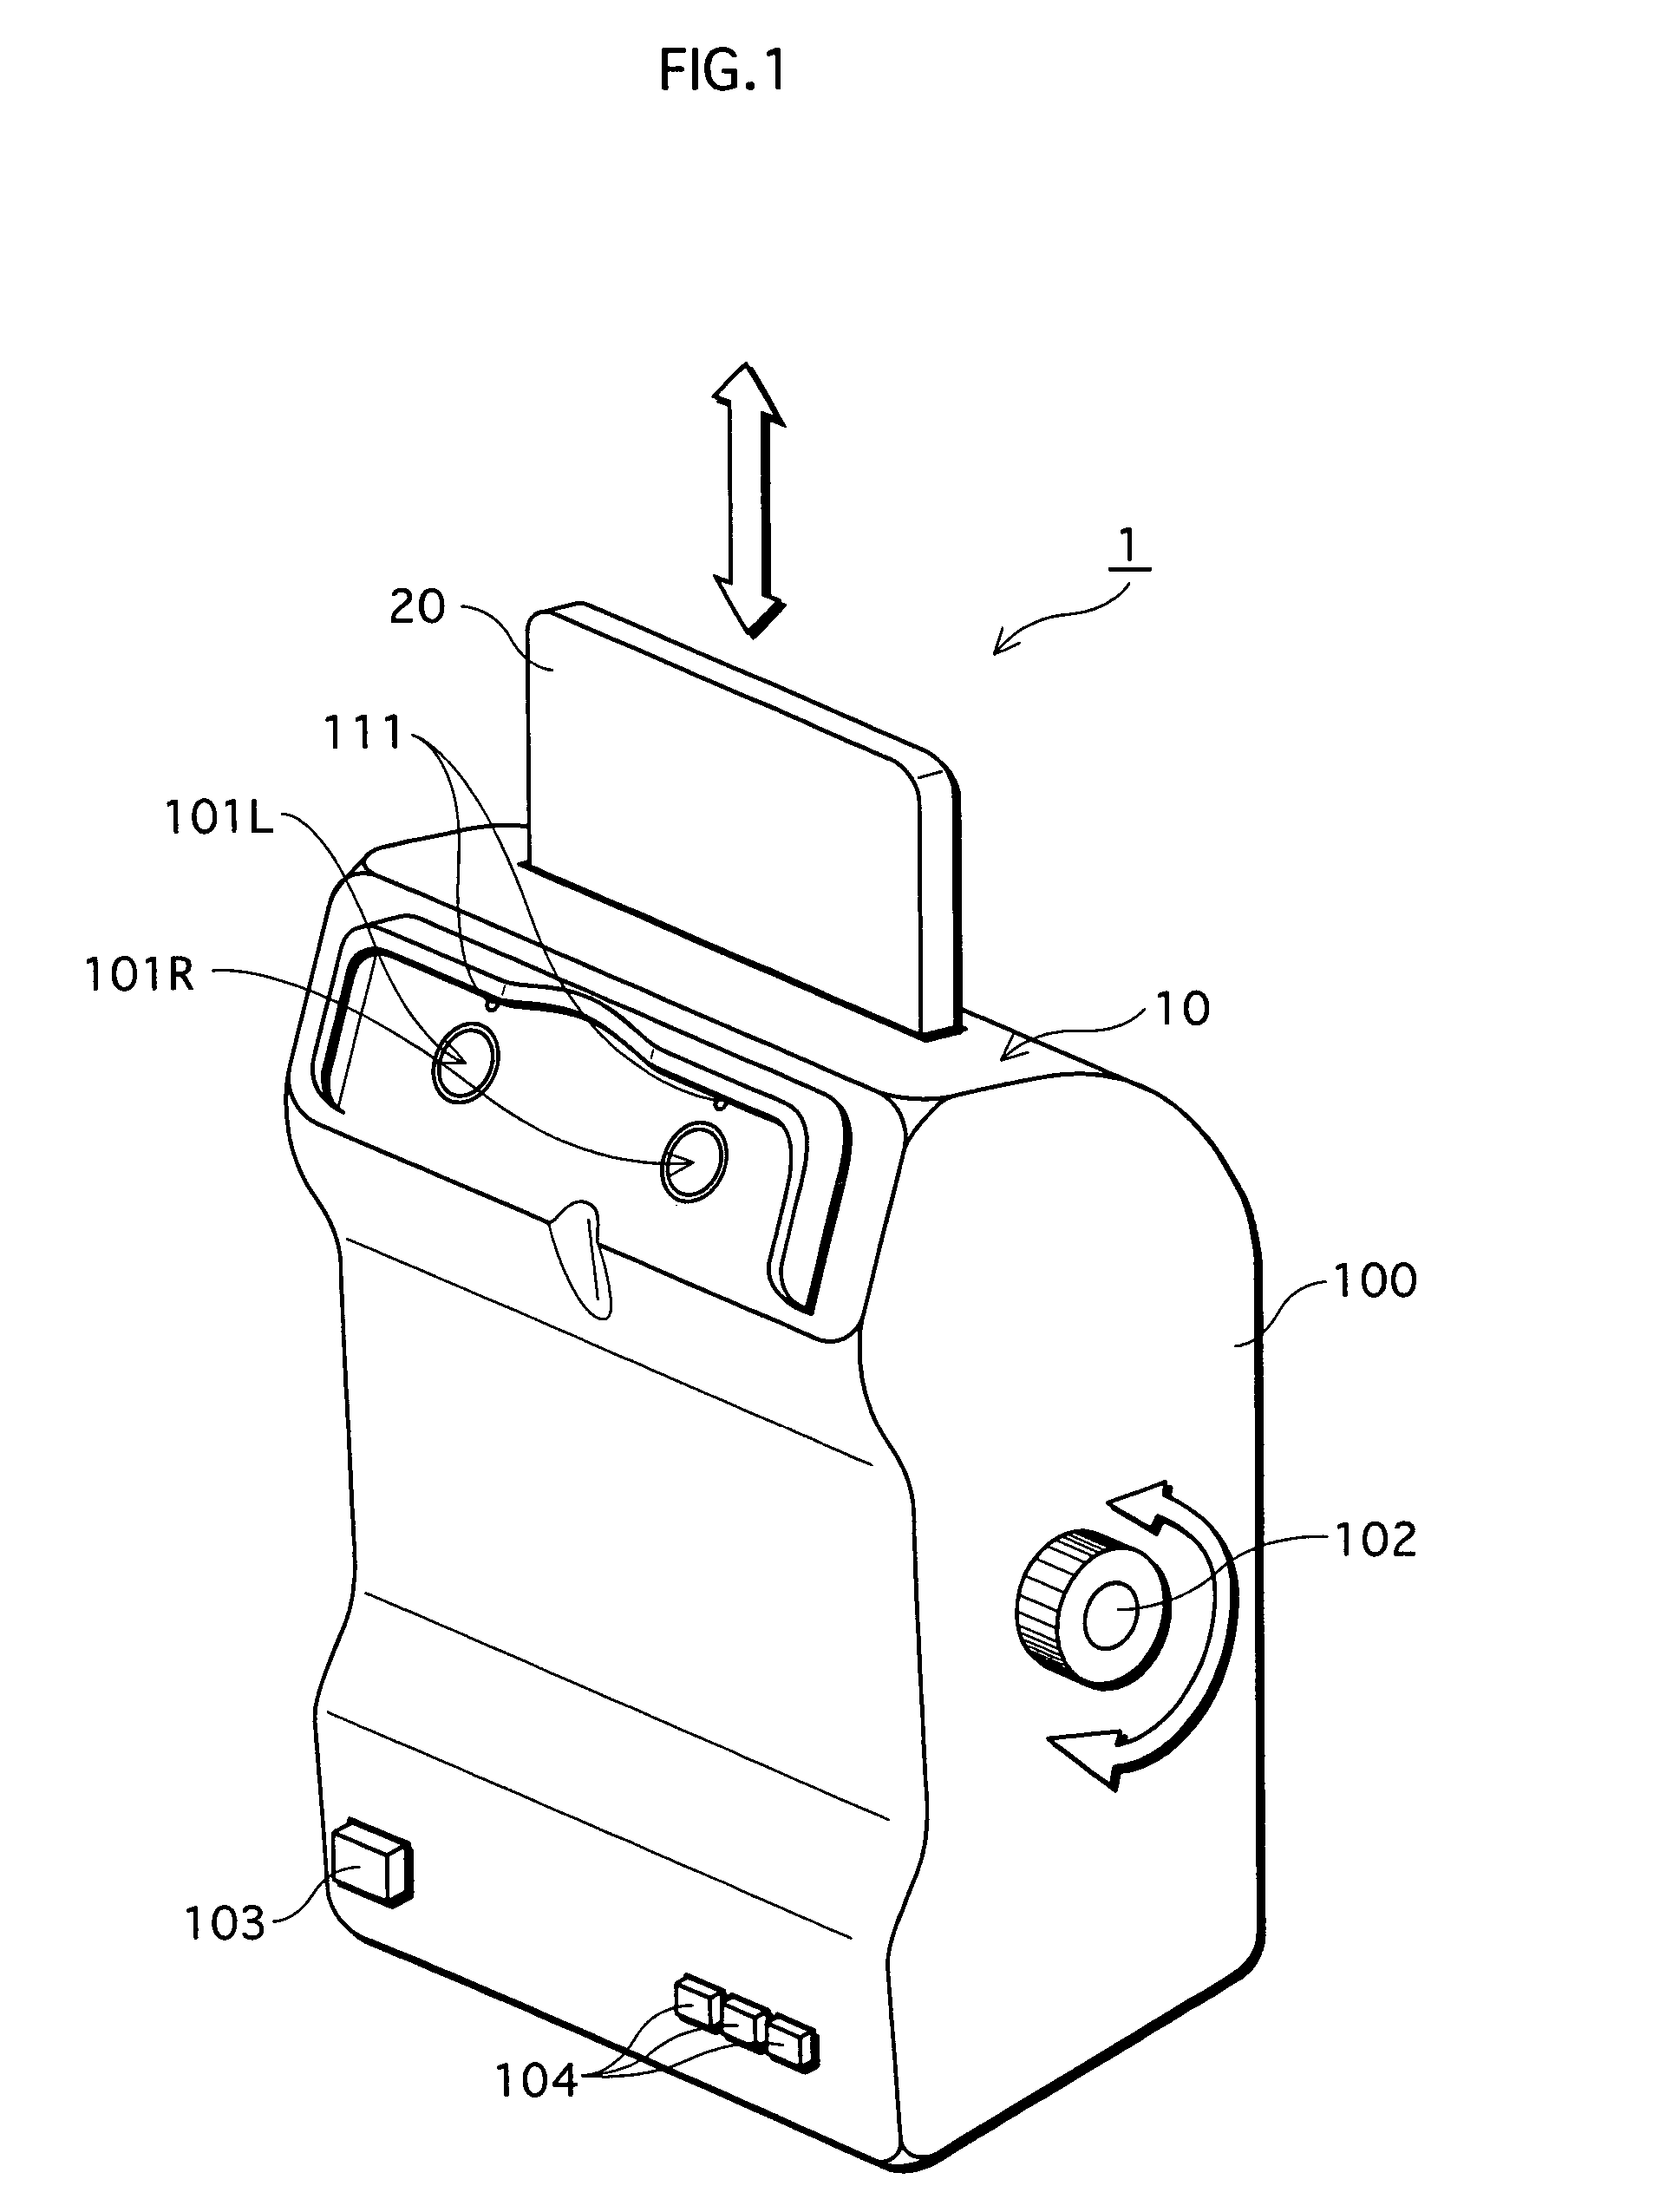 Pupil reaction ascertaining device and fatigue recovery promoting device